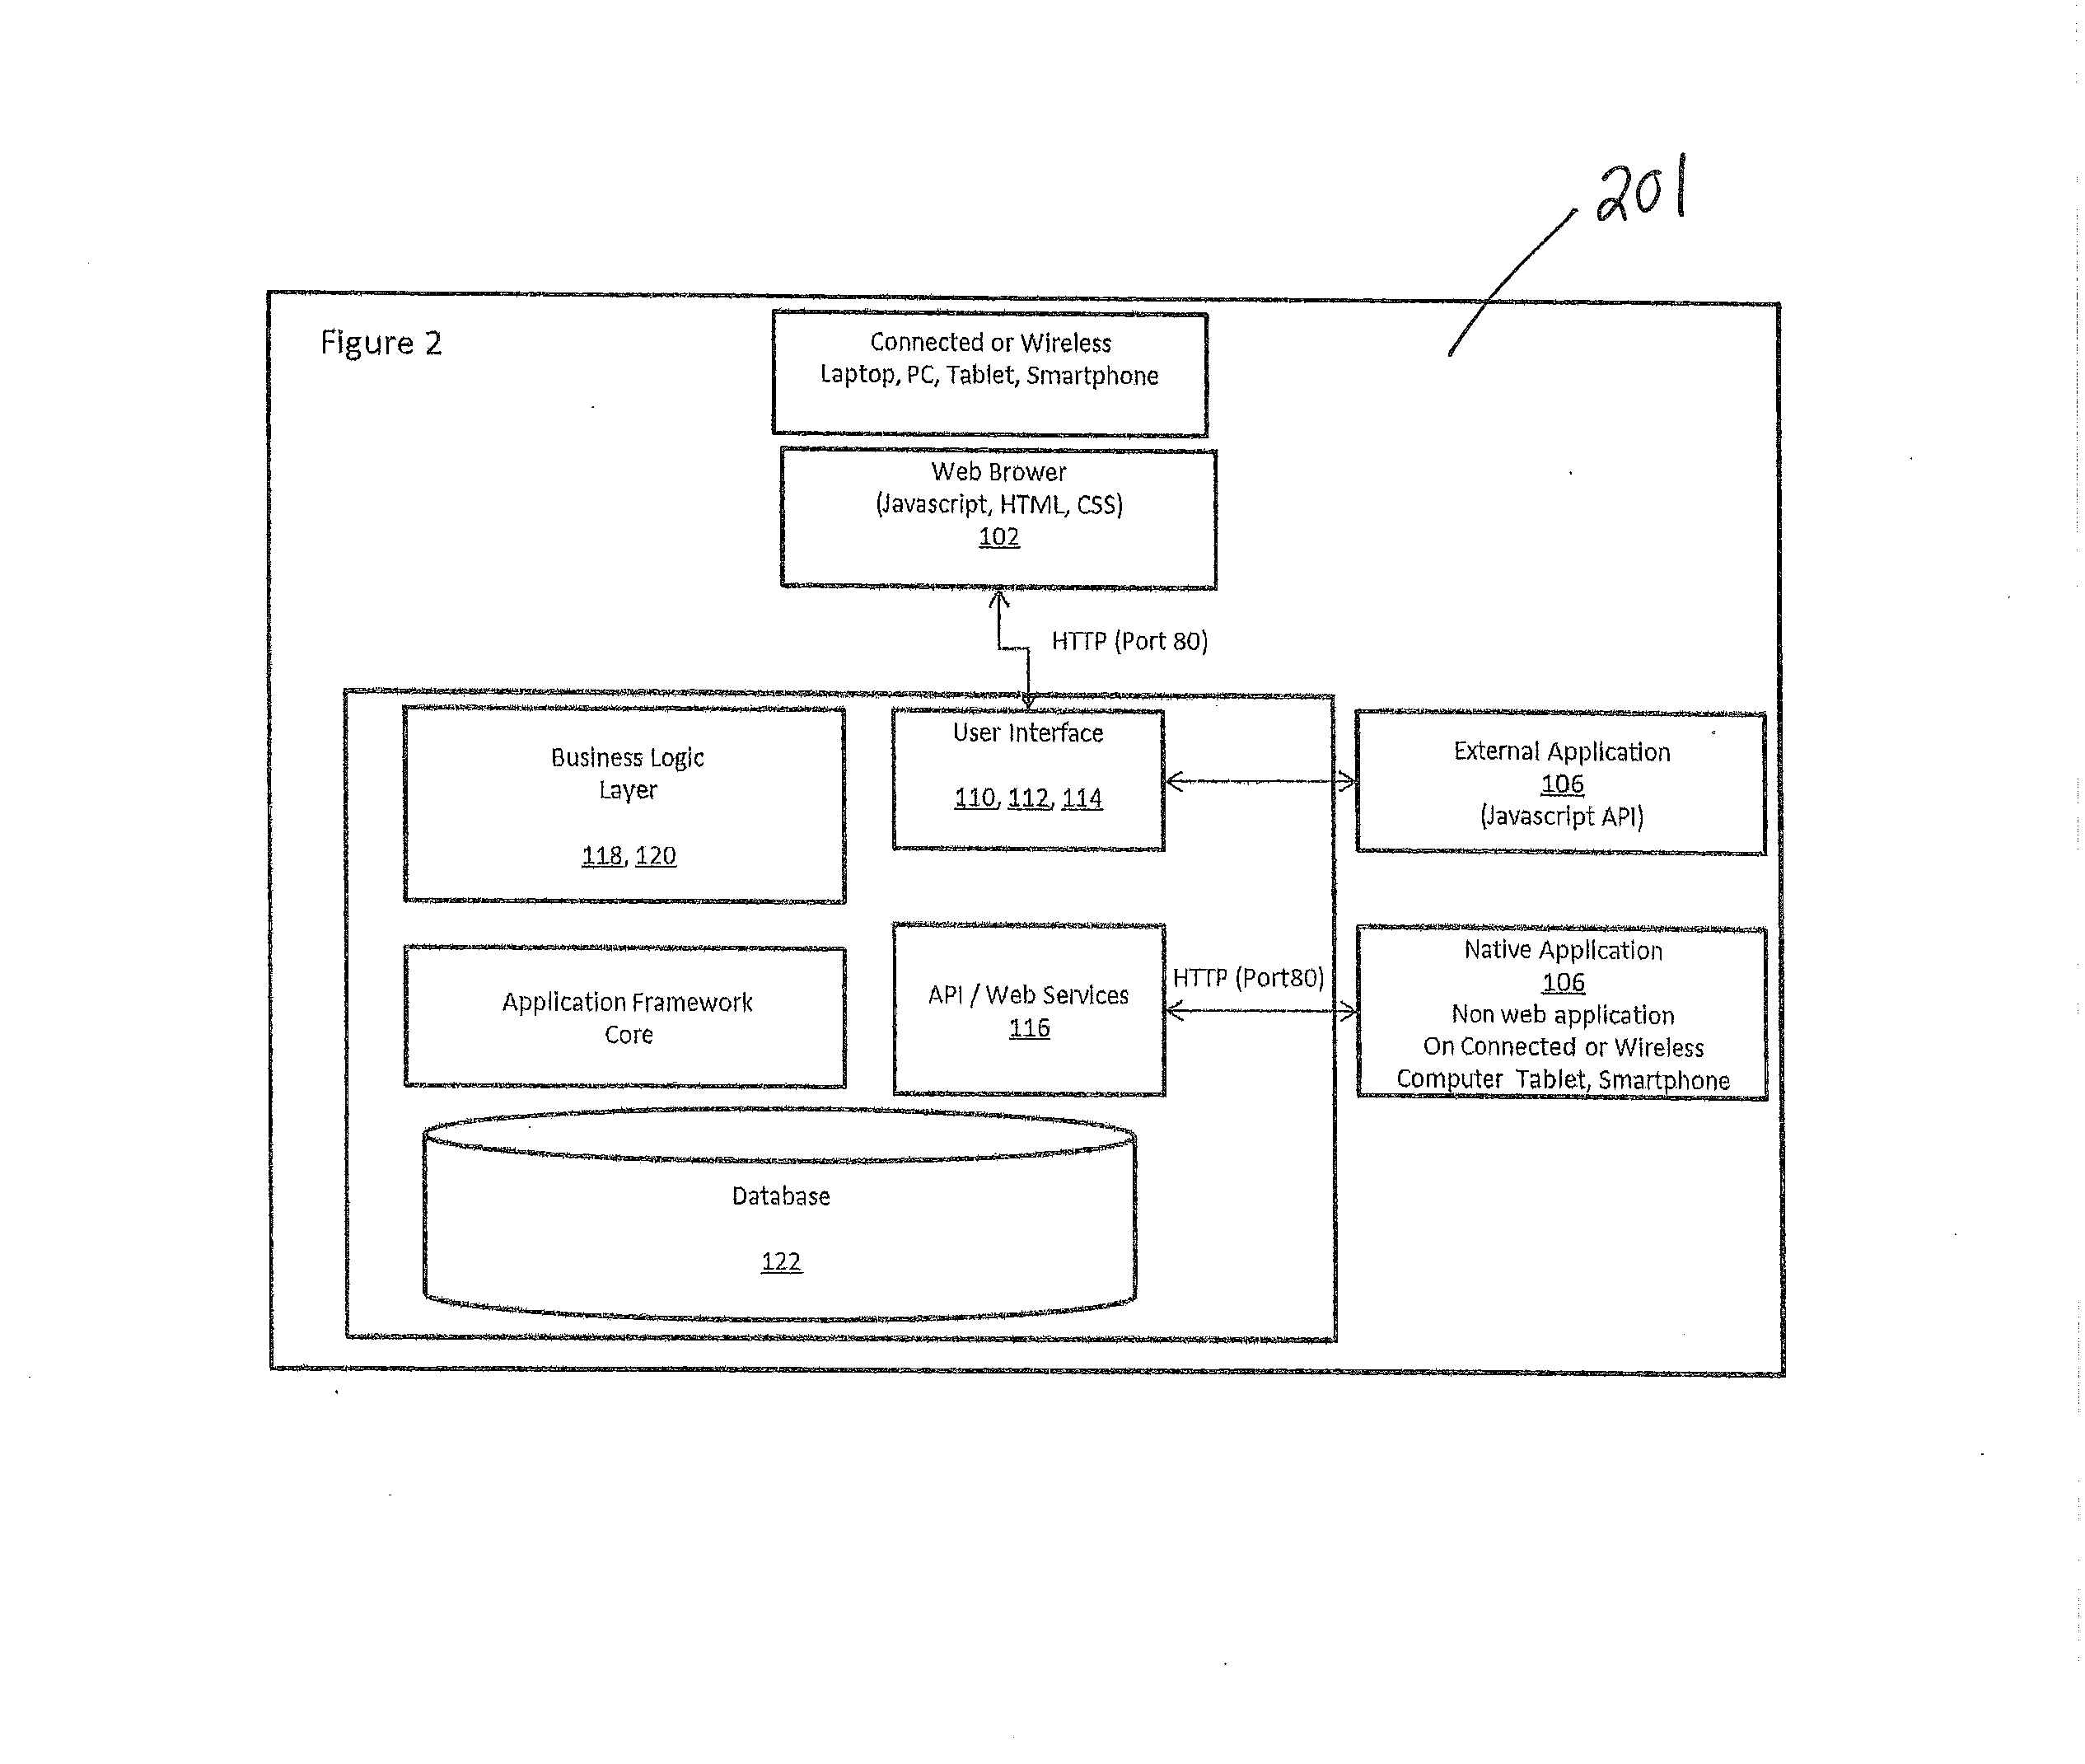 Method and system for generating and modifying electronic organizational charts